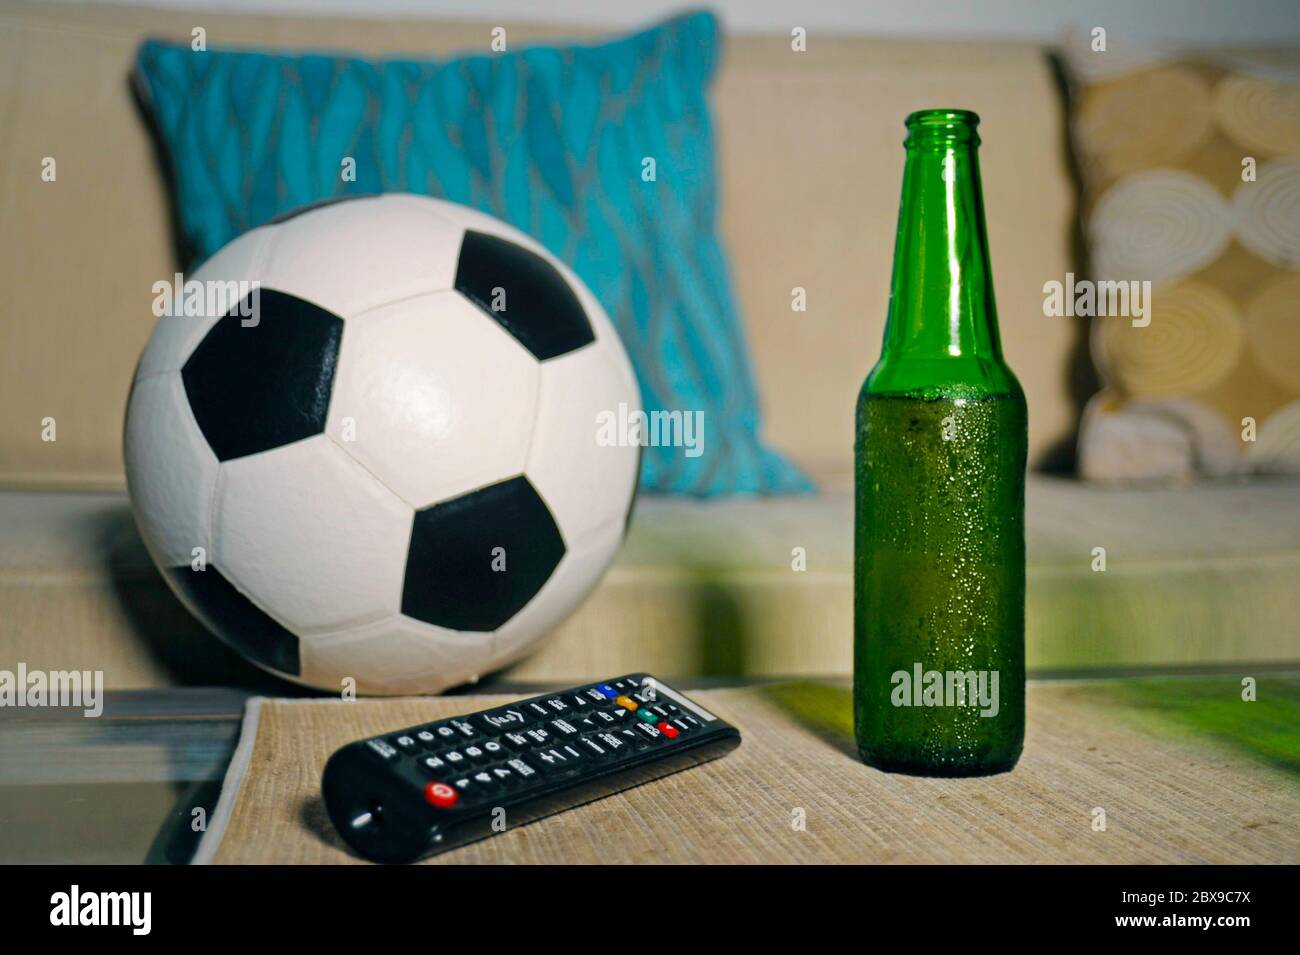 Conceptual Still Life No People About Watching Football Game In Television With Friends Featuring Soccer Ball And Remote Control Tv On Living Room Sof Stock Photo Alamy